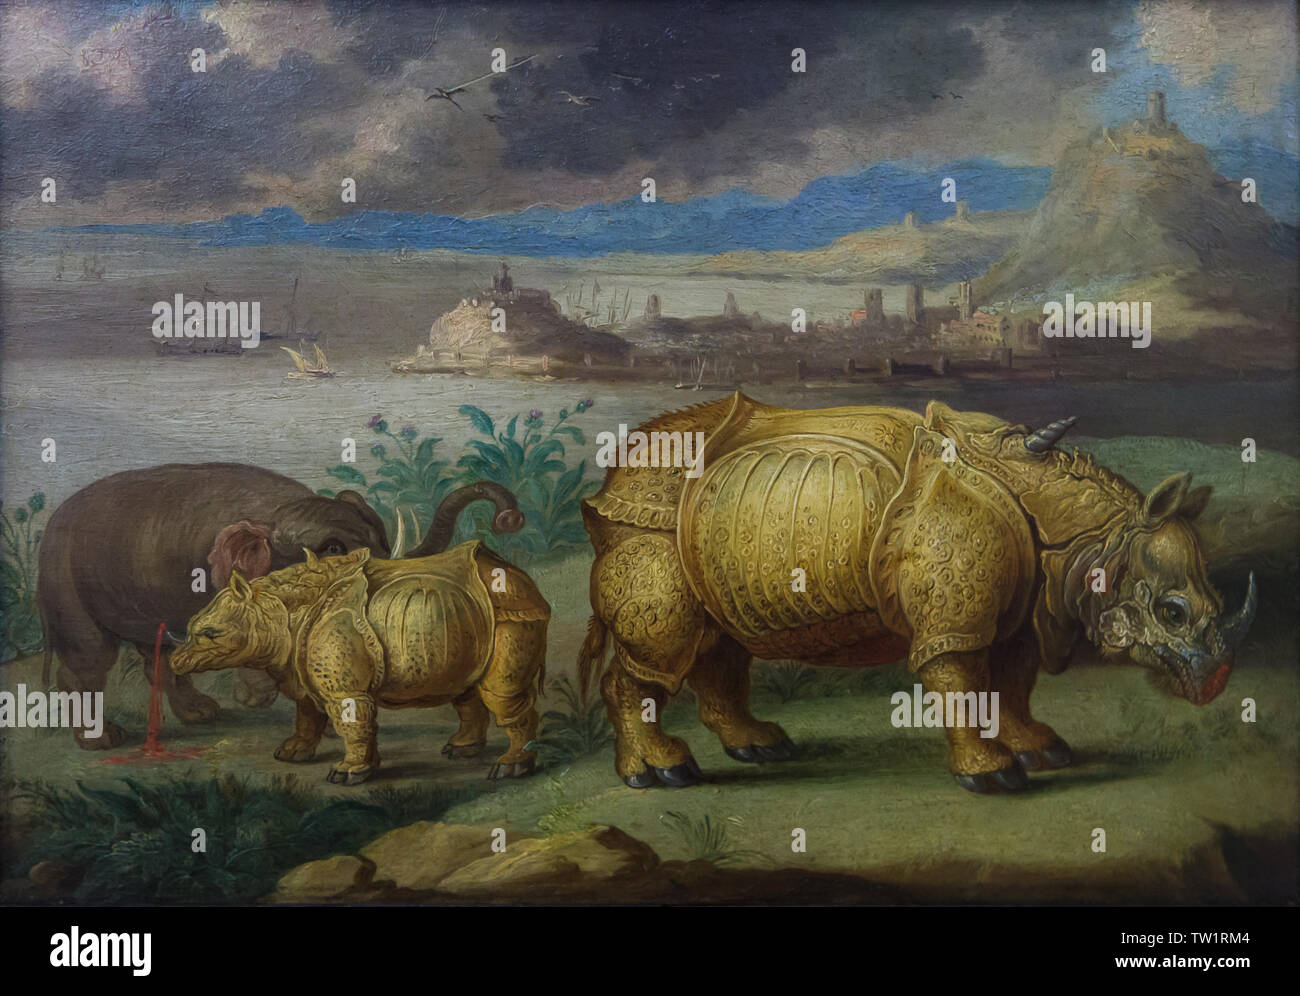 Indian rhinoceroses and African elephant depicted in the detail devoted to the city of Ceuta in the painting 'Africa' from the series of paintings 'Four Continents' by Flemish painter Jan van Kessel the Elder (1666) on display in the Alte Pinakothek in Munich, Bavaria, Germany. Stock Photo